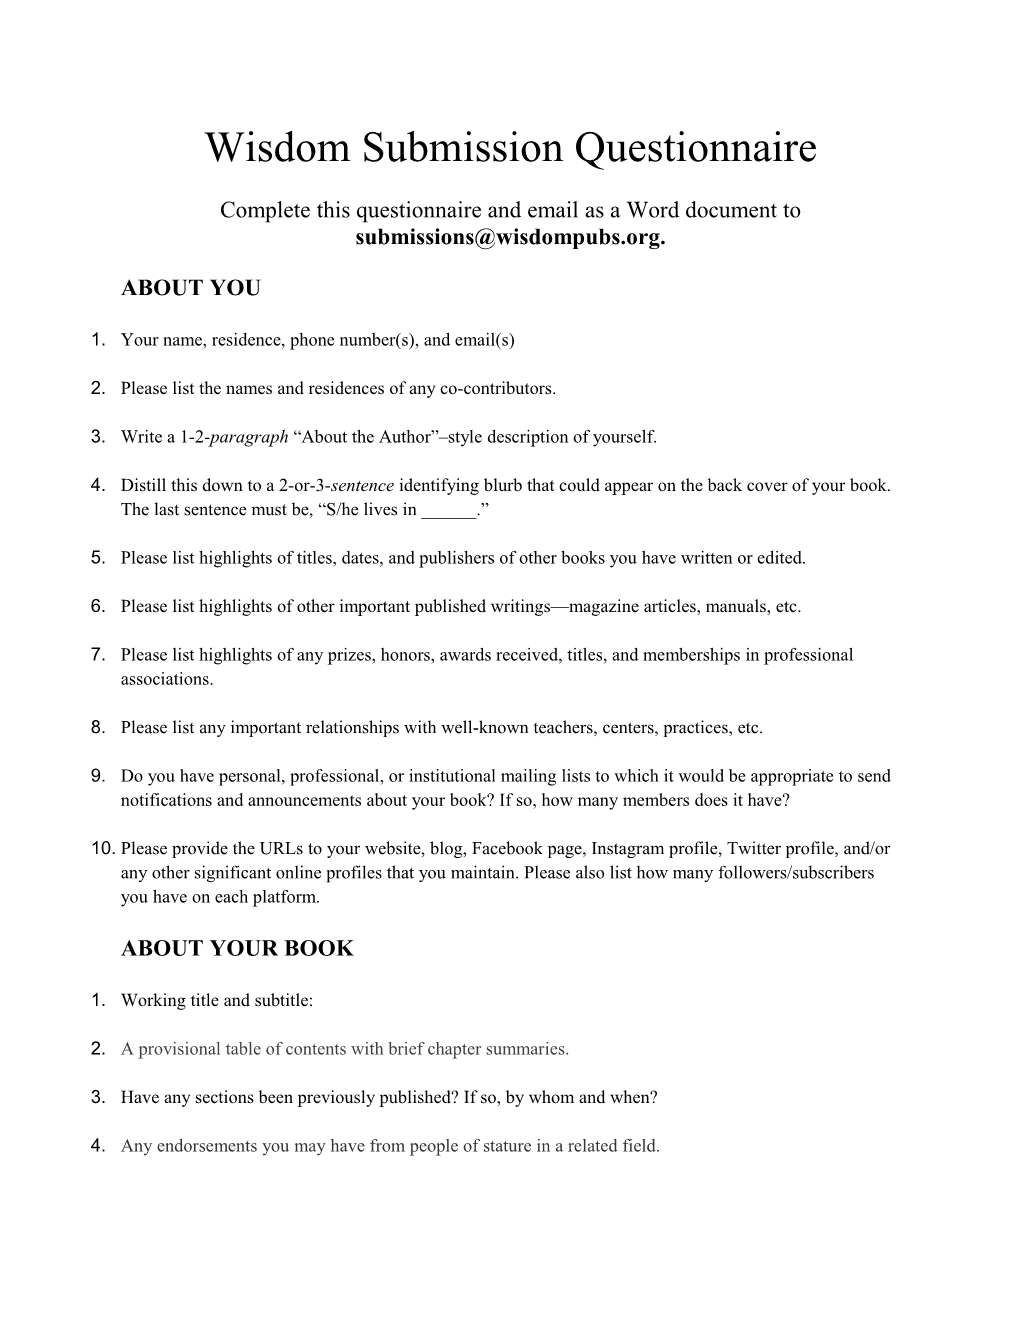 Complete This Questionnaire and Email As a Word Document To